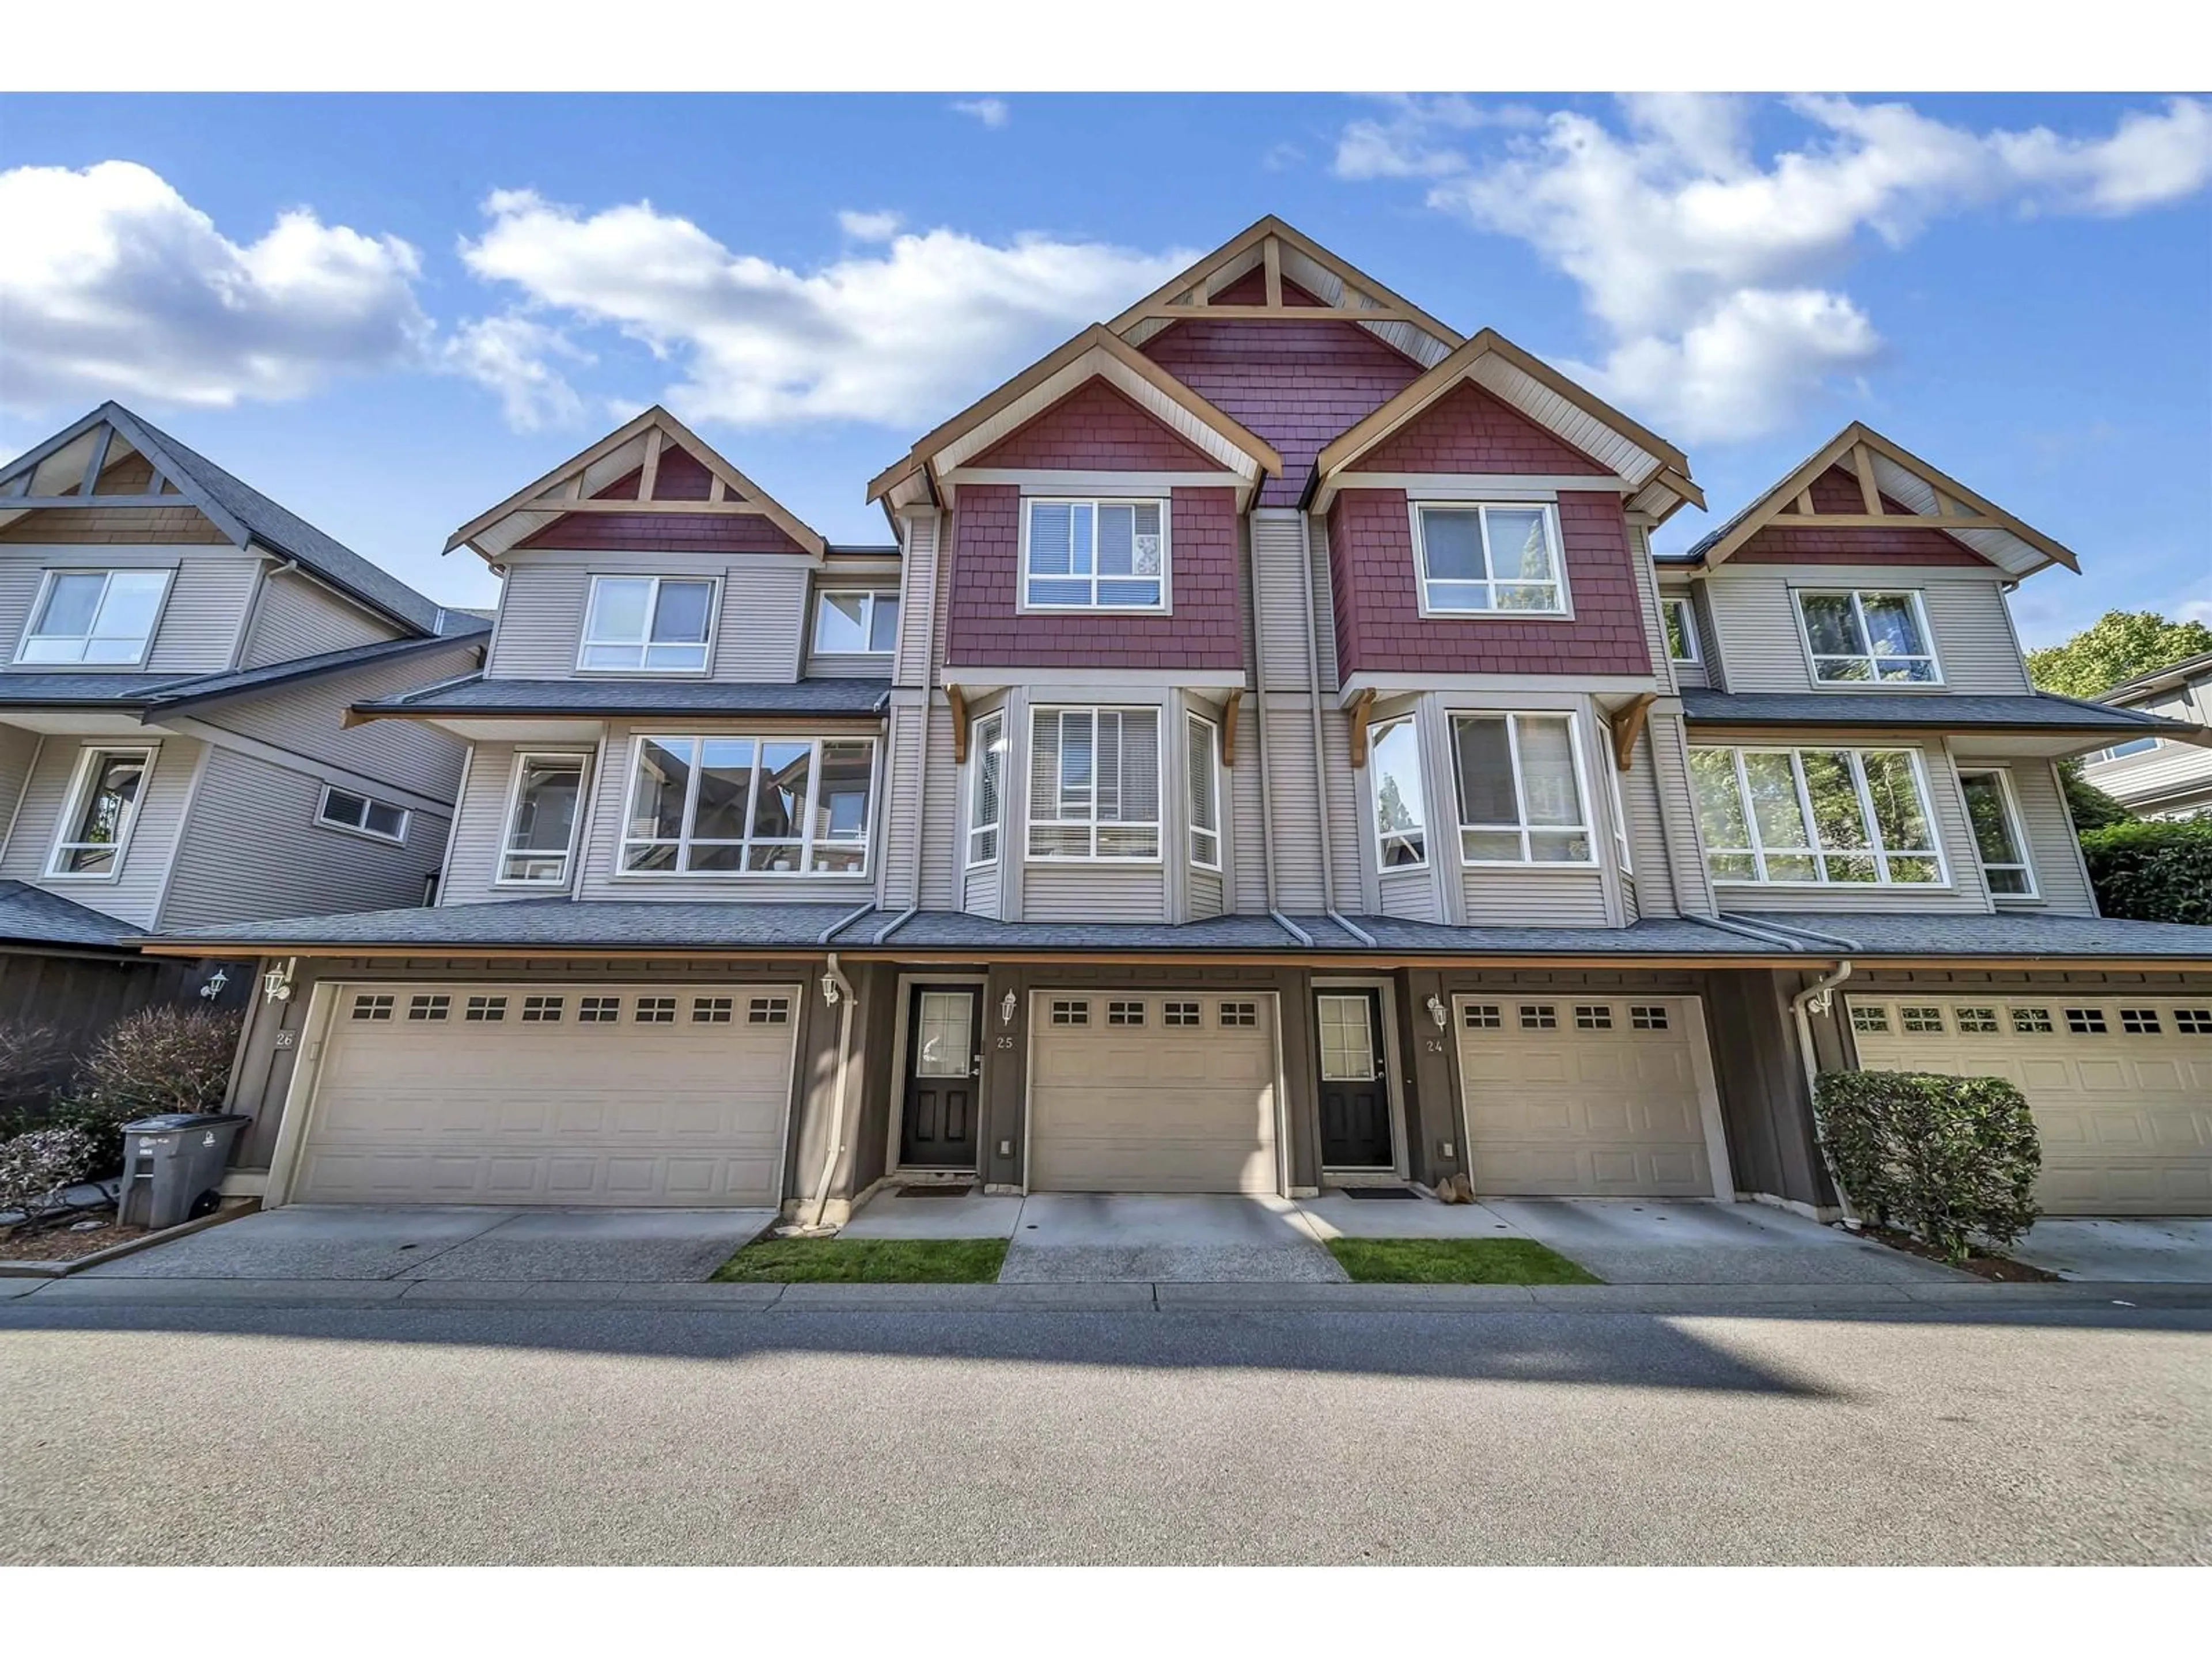 A pic from exterior of the house or condo for 25 16789 60 AVENUE, Surrey British Columbia V3S1S8